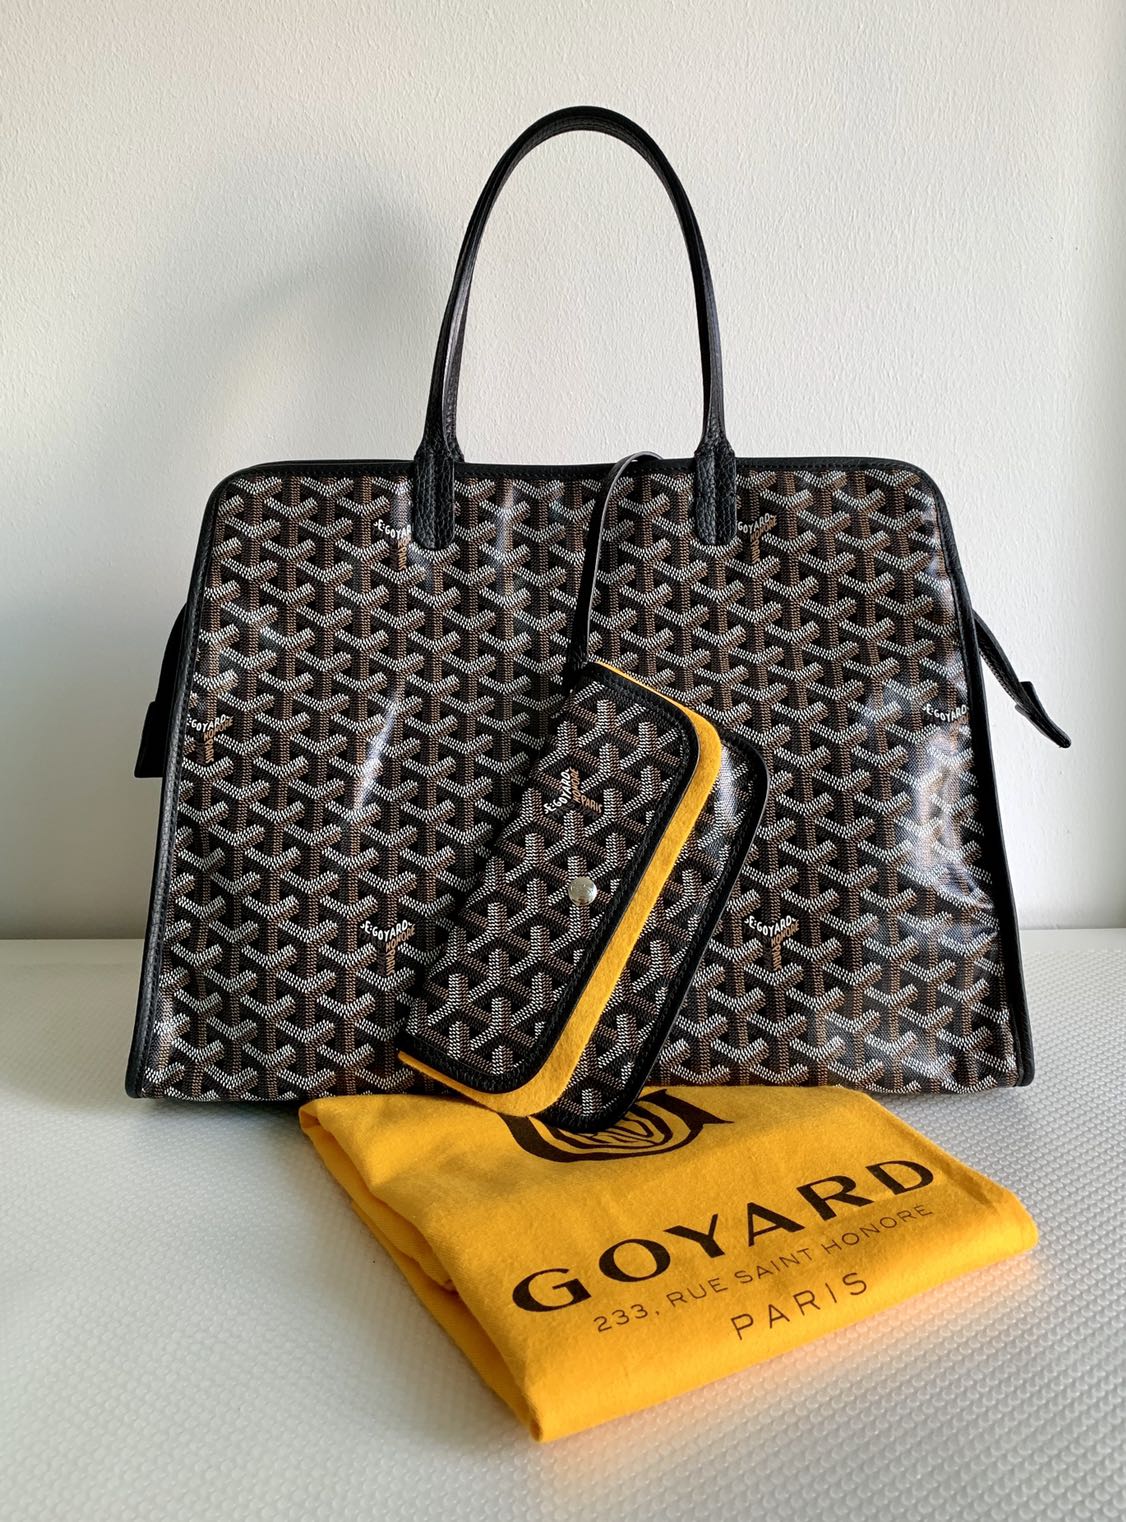 goyard hardy pm 2 Limited Special Sales and Special Offers